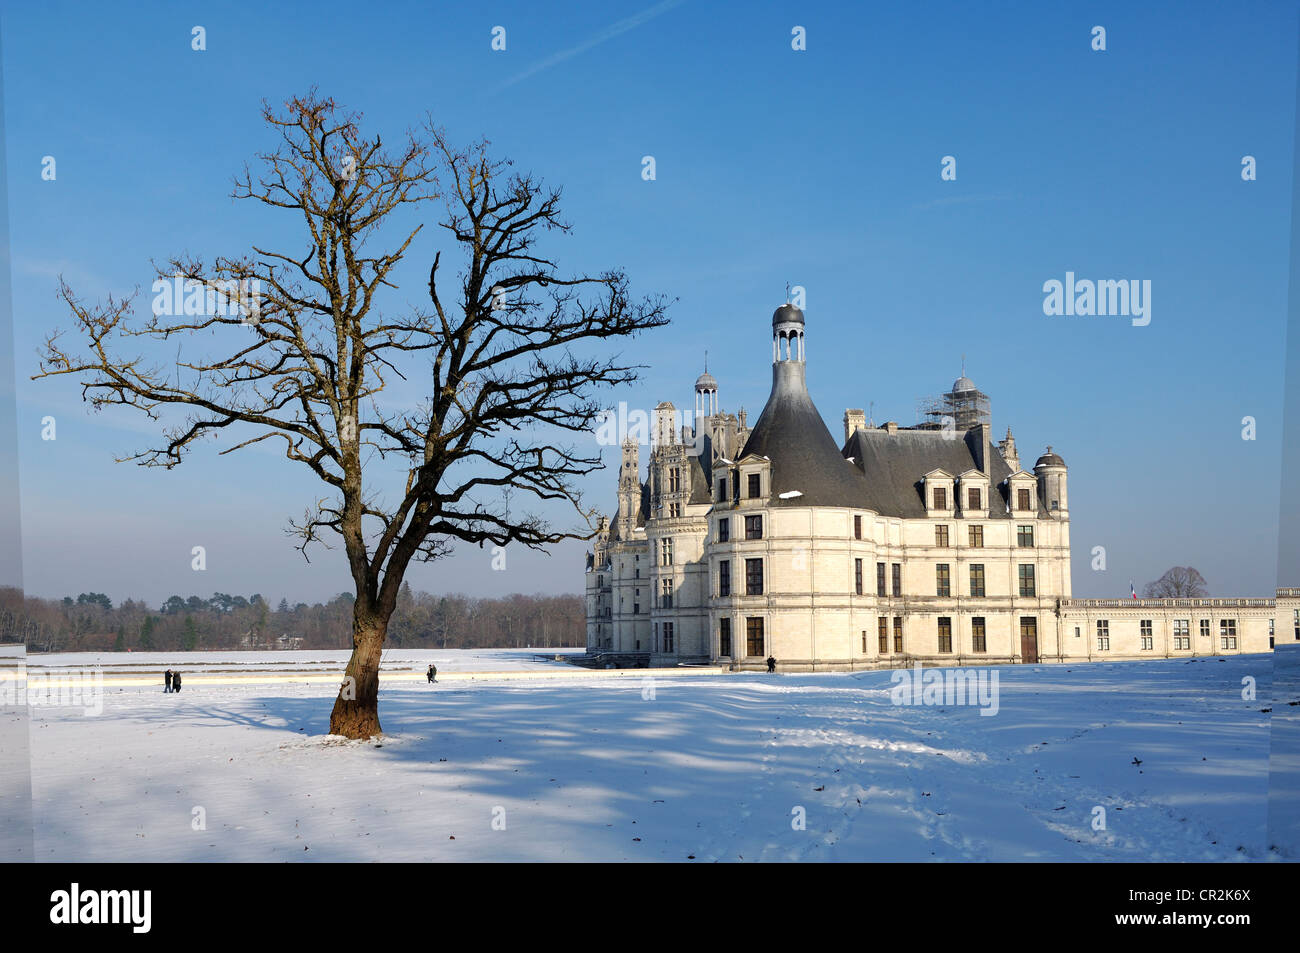 France Chambord chateau : one of the most famous castles in Loire Valley. Stock Photo